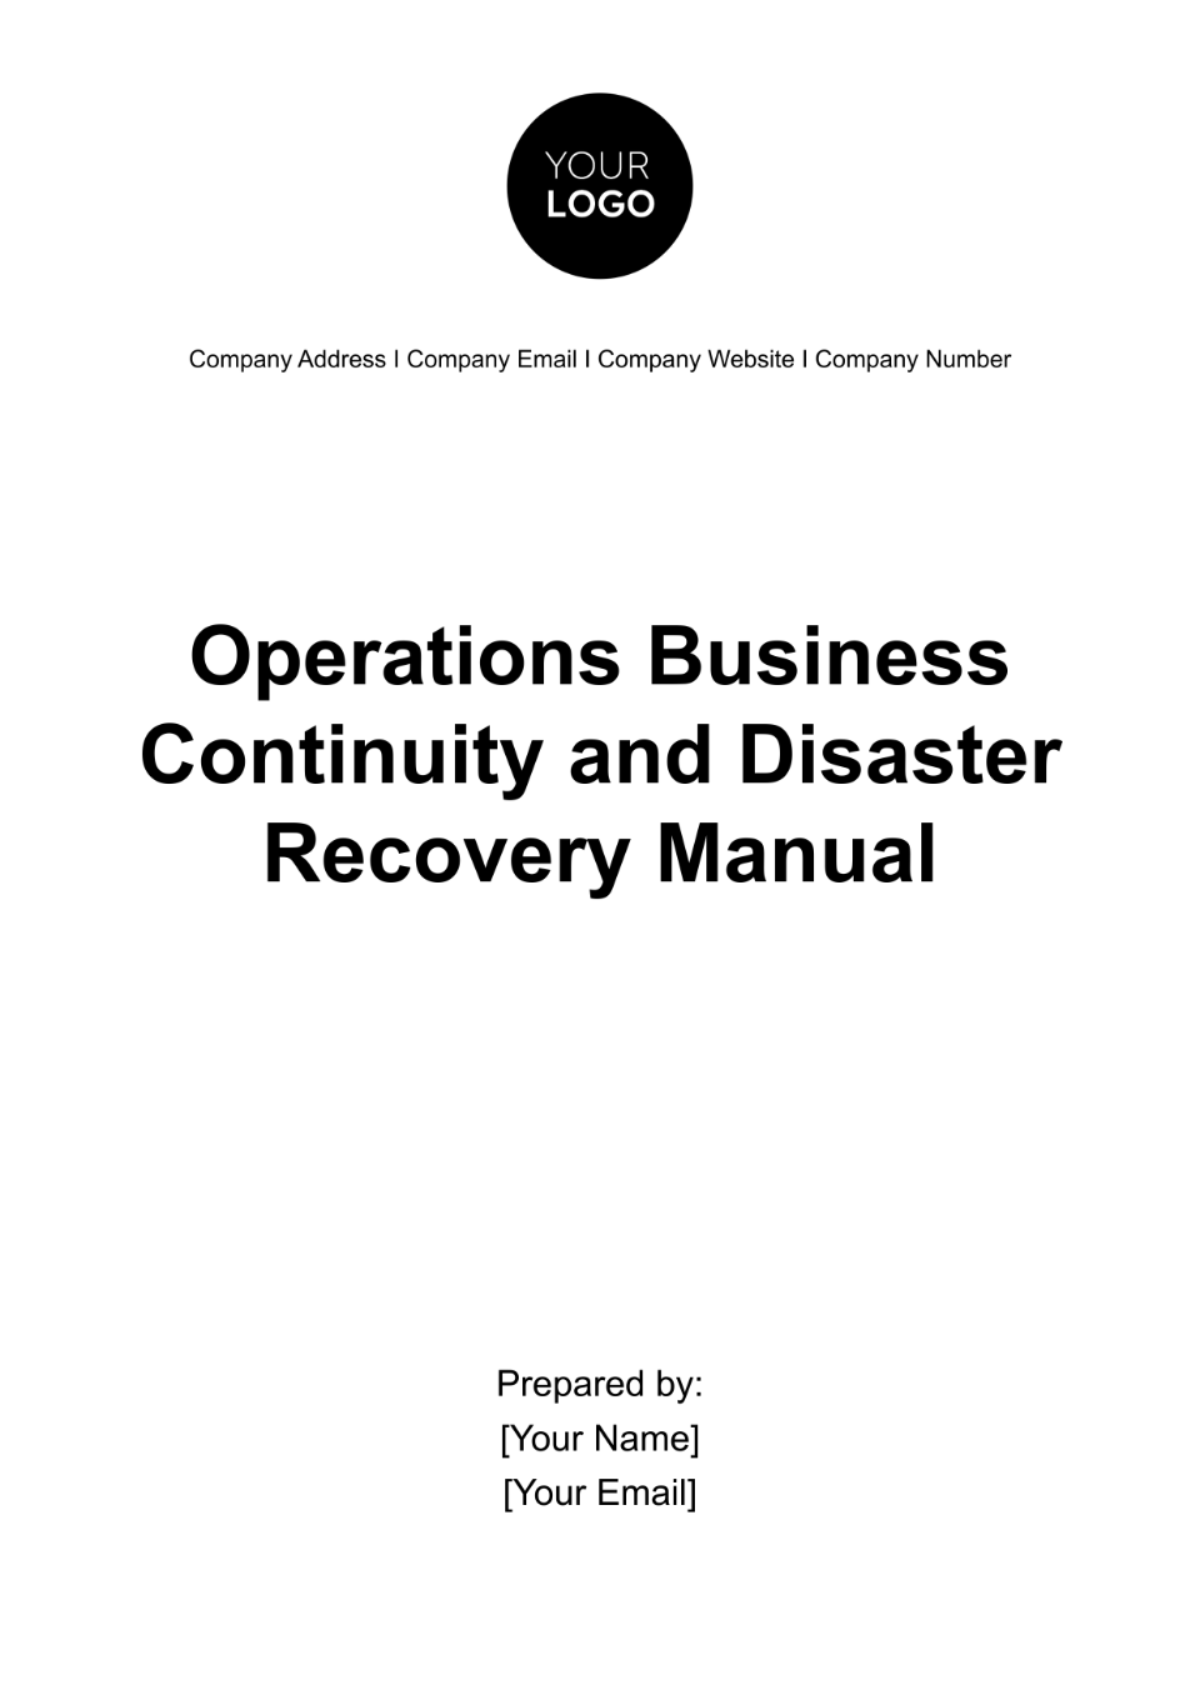 Free Operations Business Continuity and Disaster Recovery Manual Template